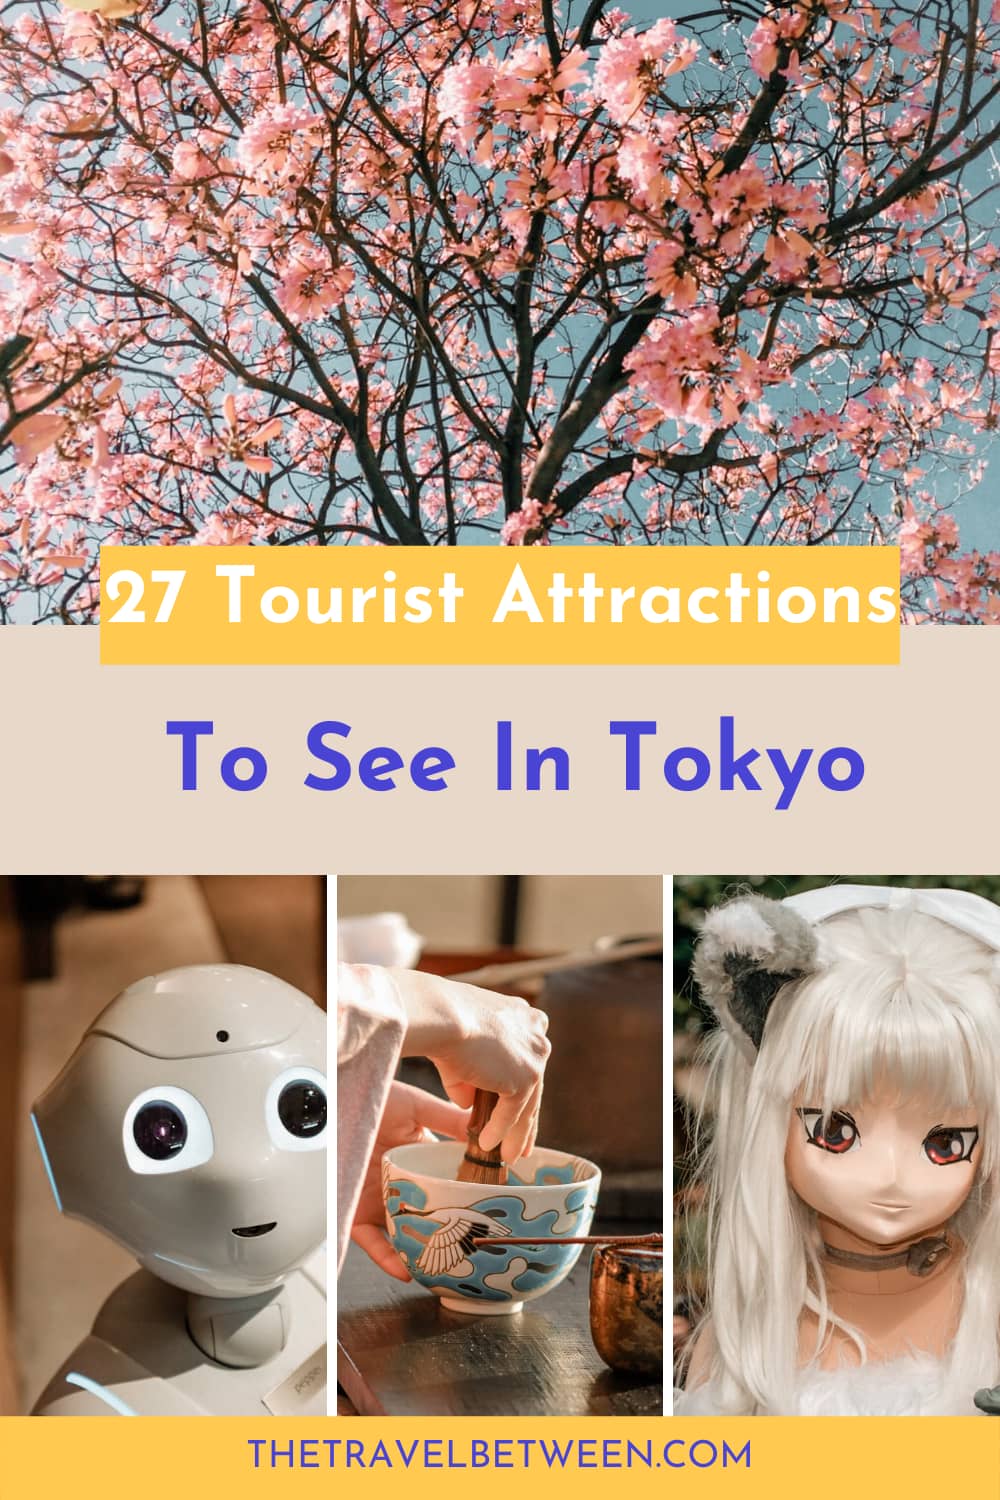 Attractions in Tokyo 2